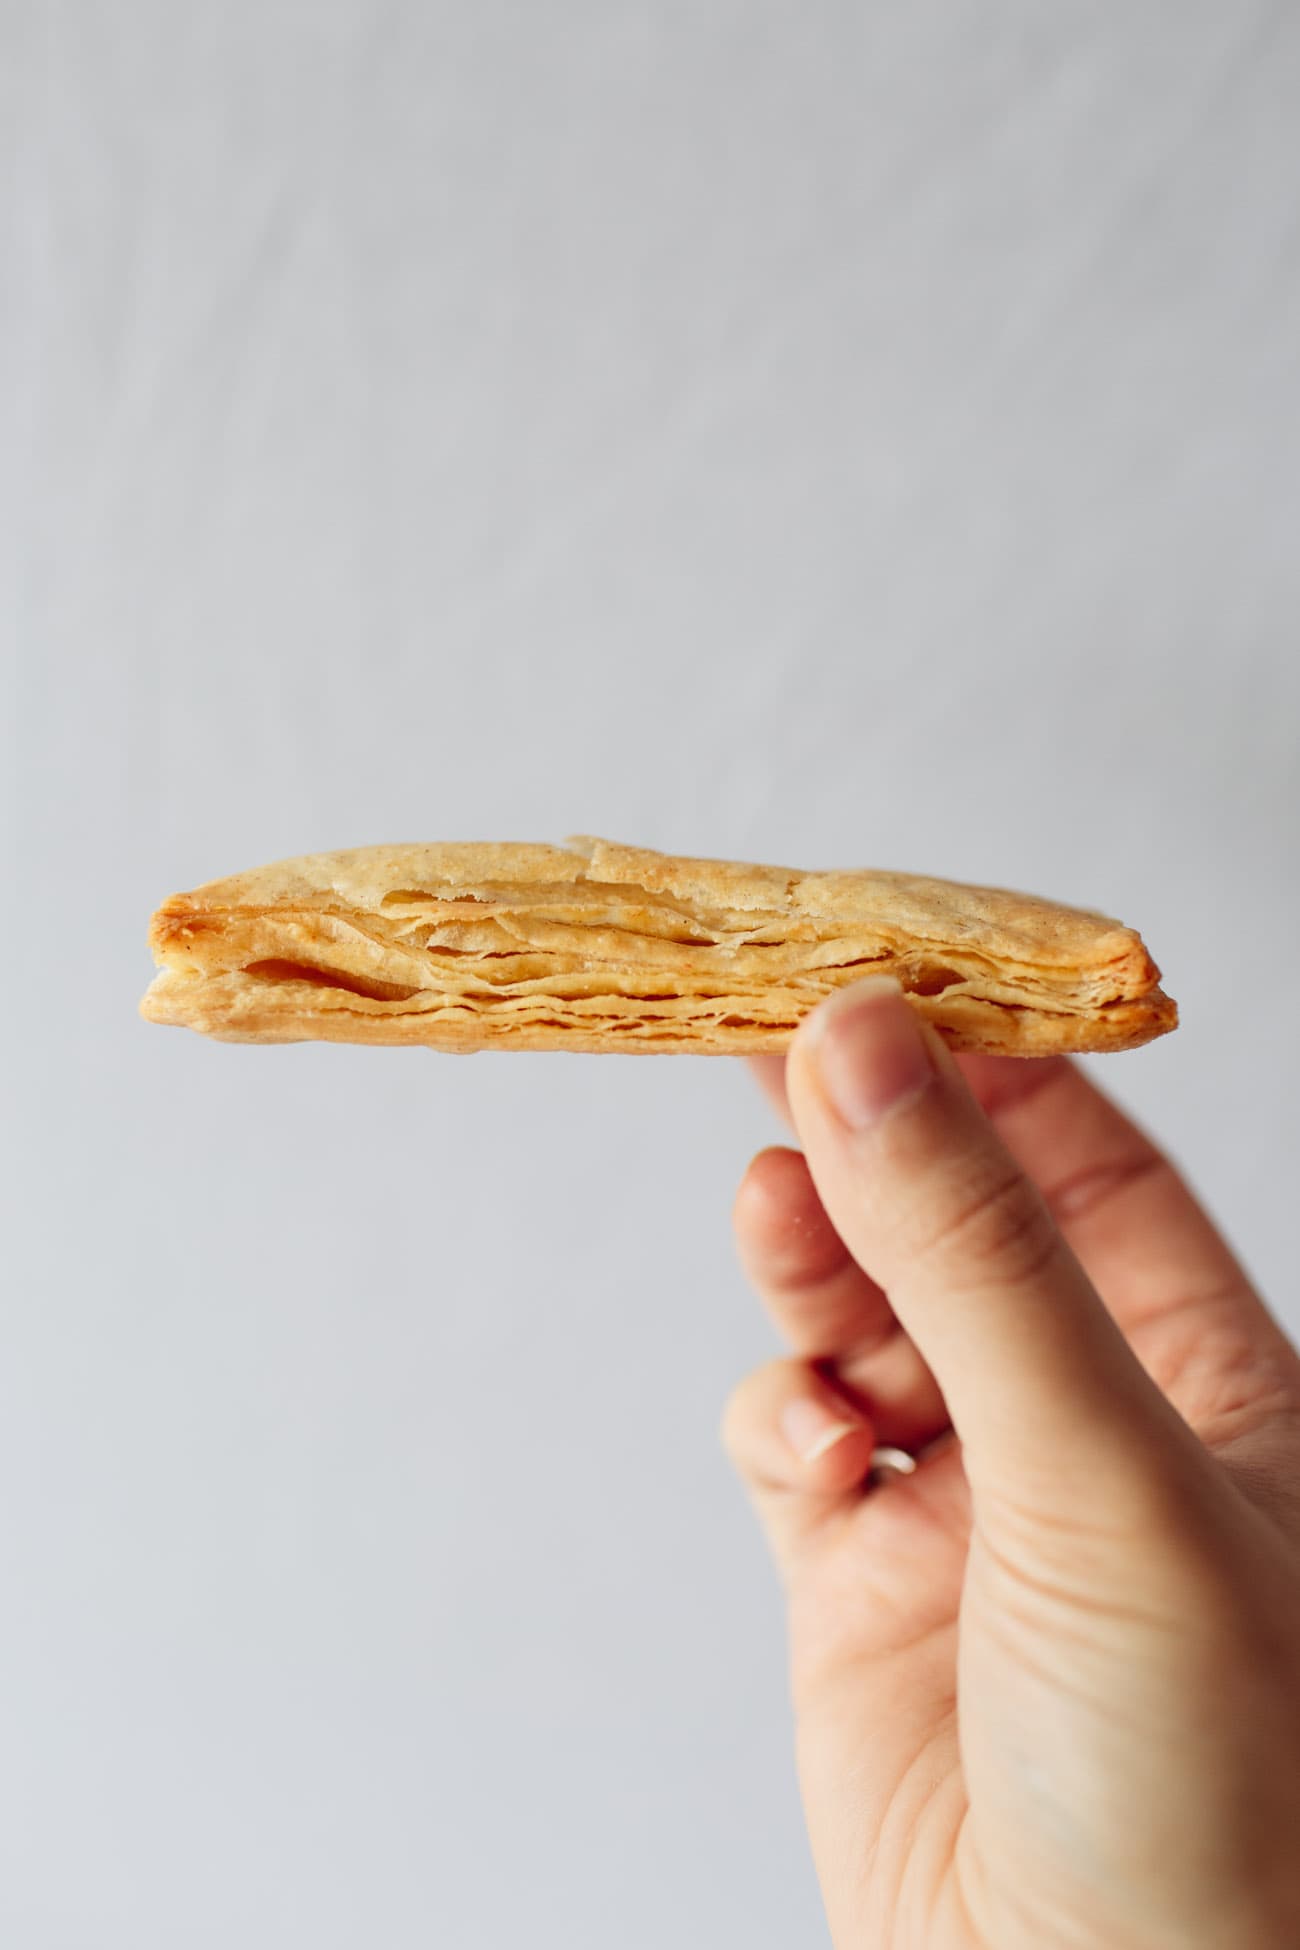 A piece of baked rough puff pastry